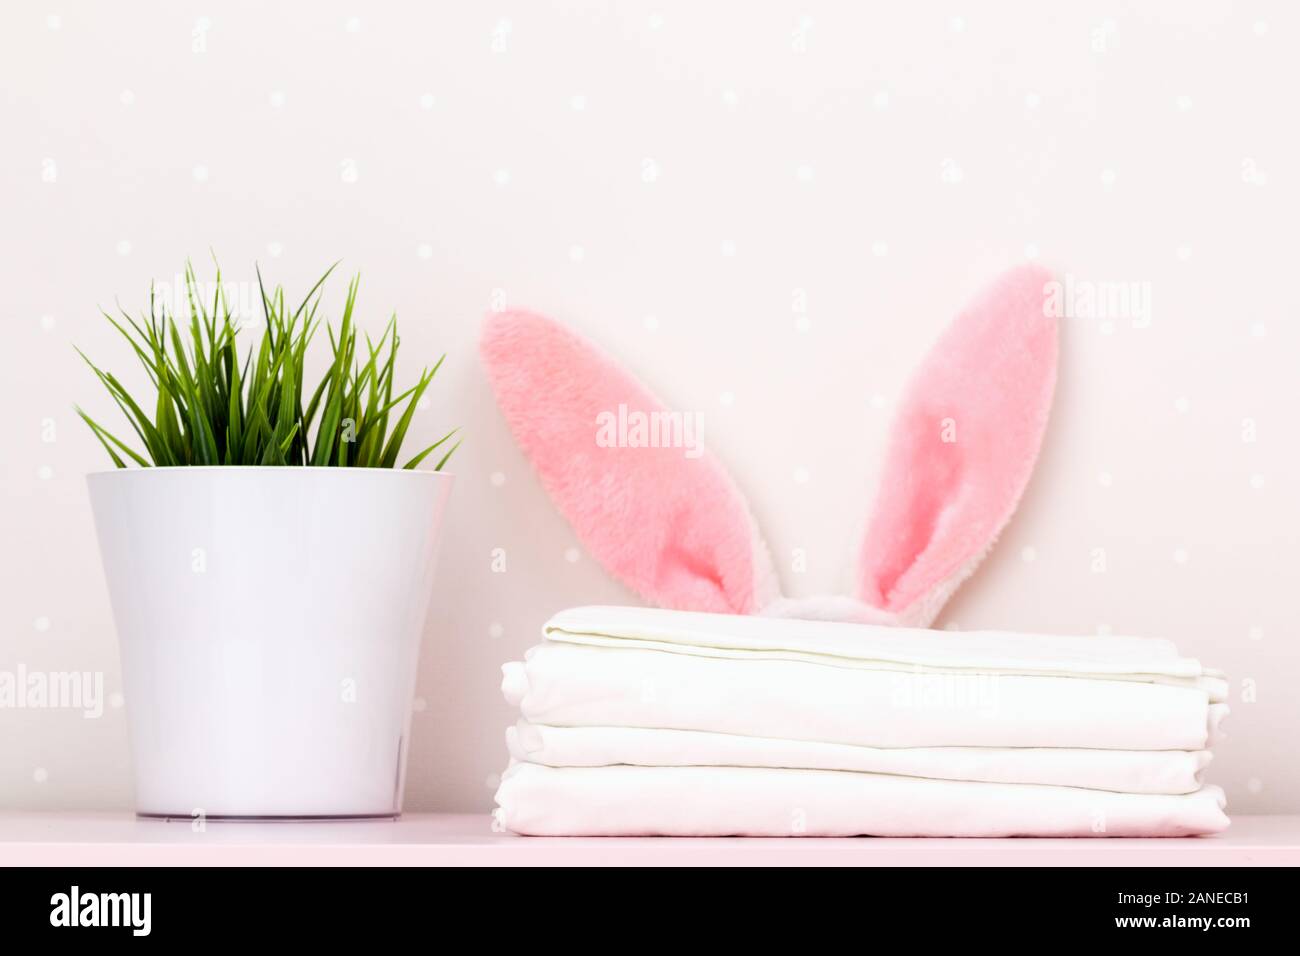 A close-up of a stack of clean white bedding, Easter bunny ears and a houseplant, on a dressing table, against a background of light walls. Stock Photo